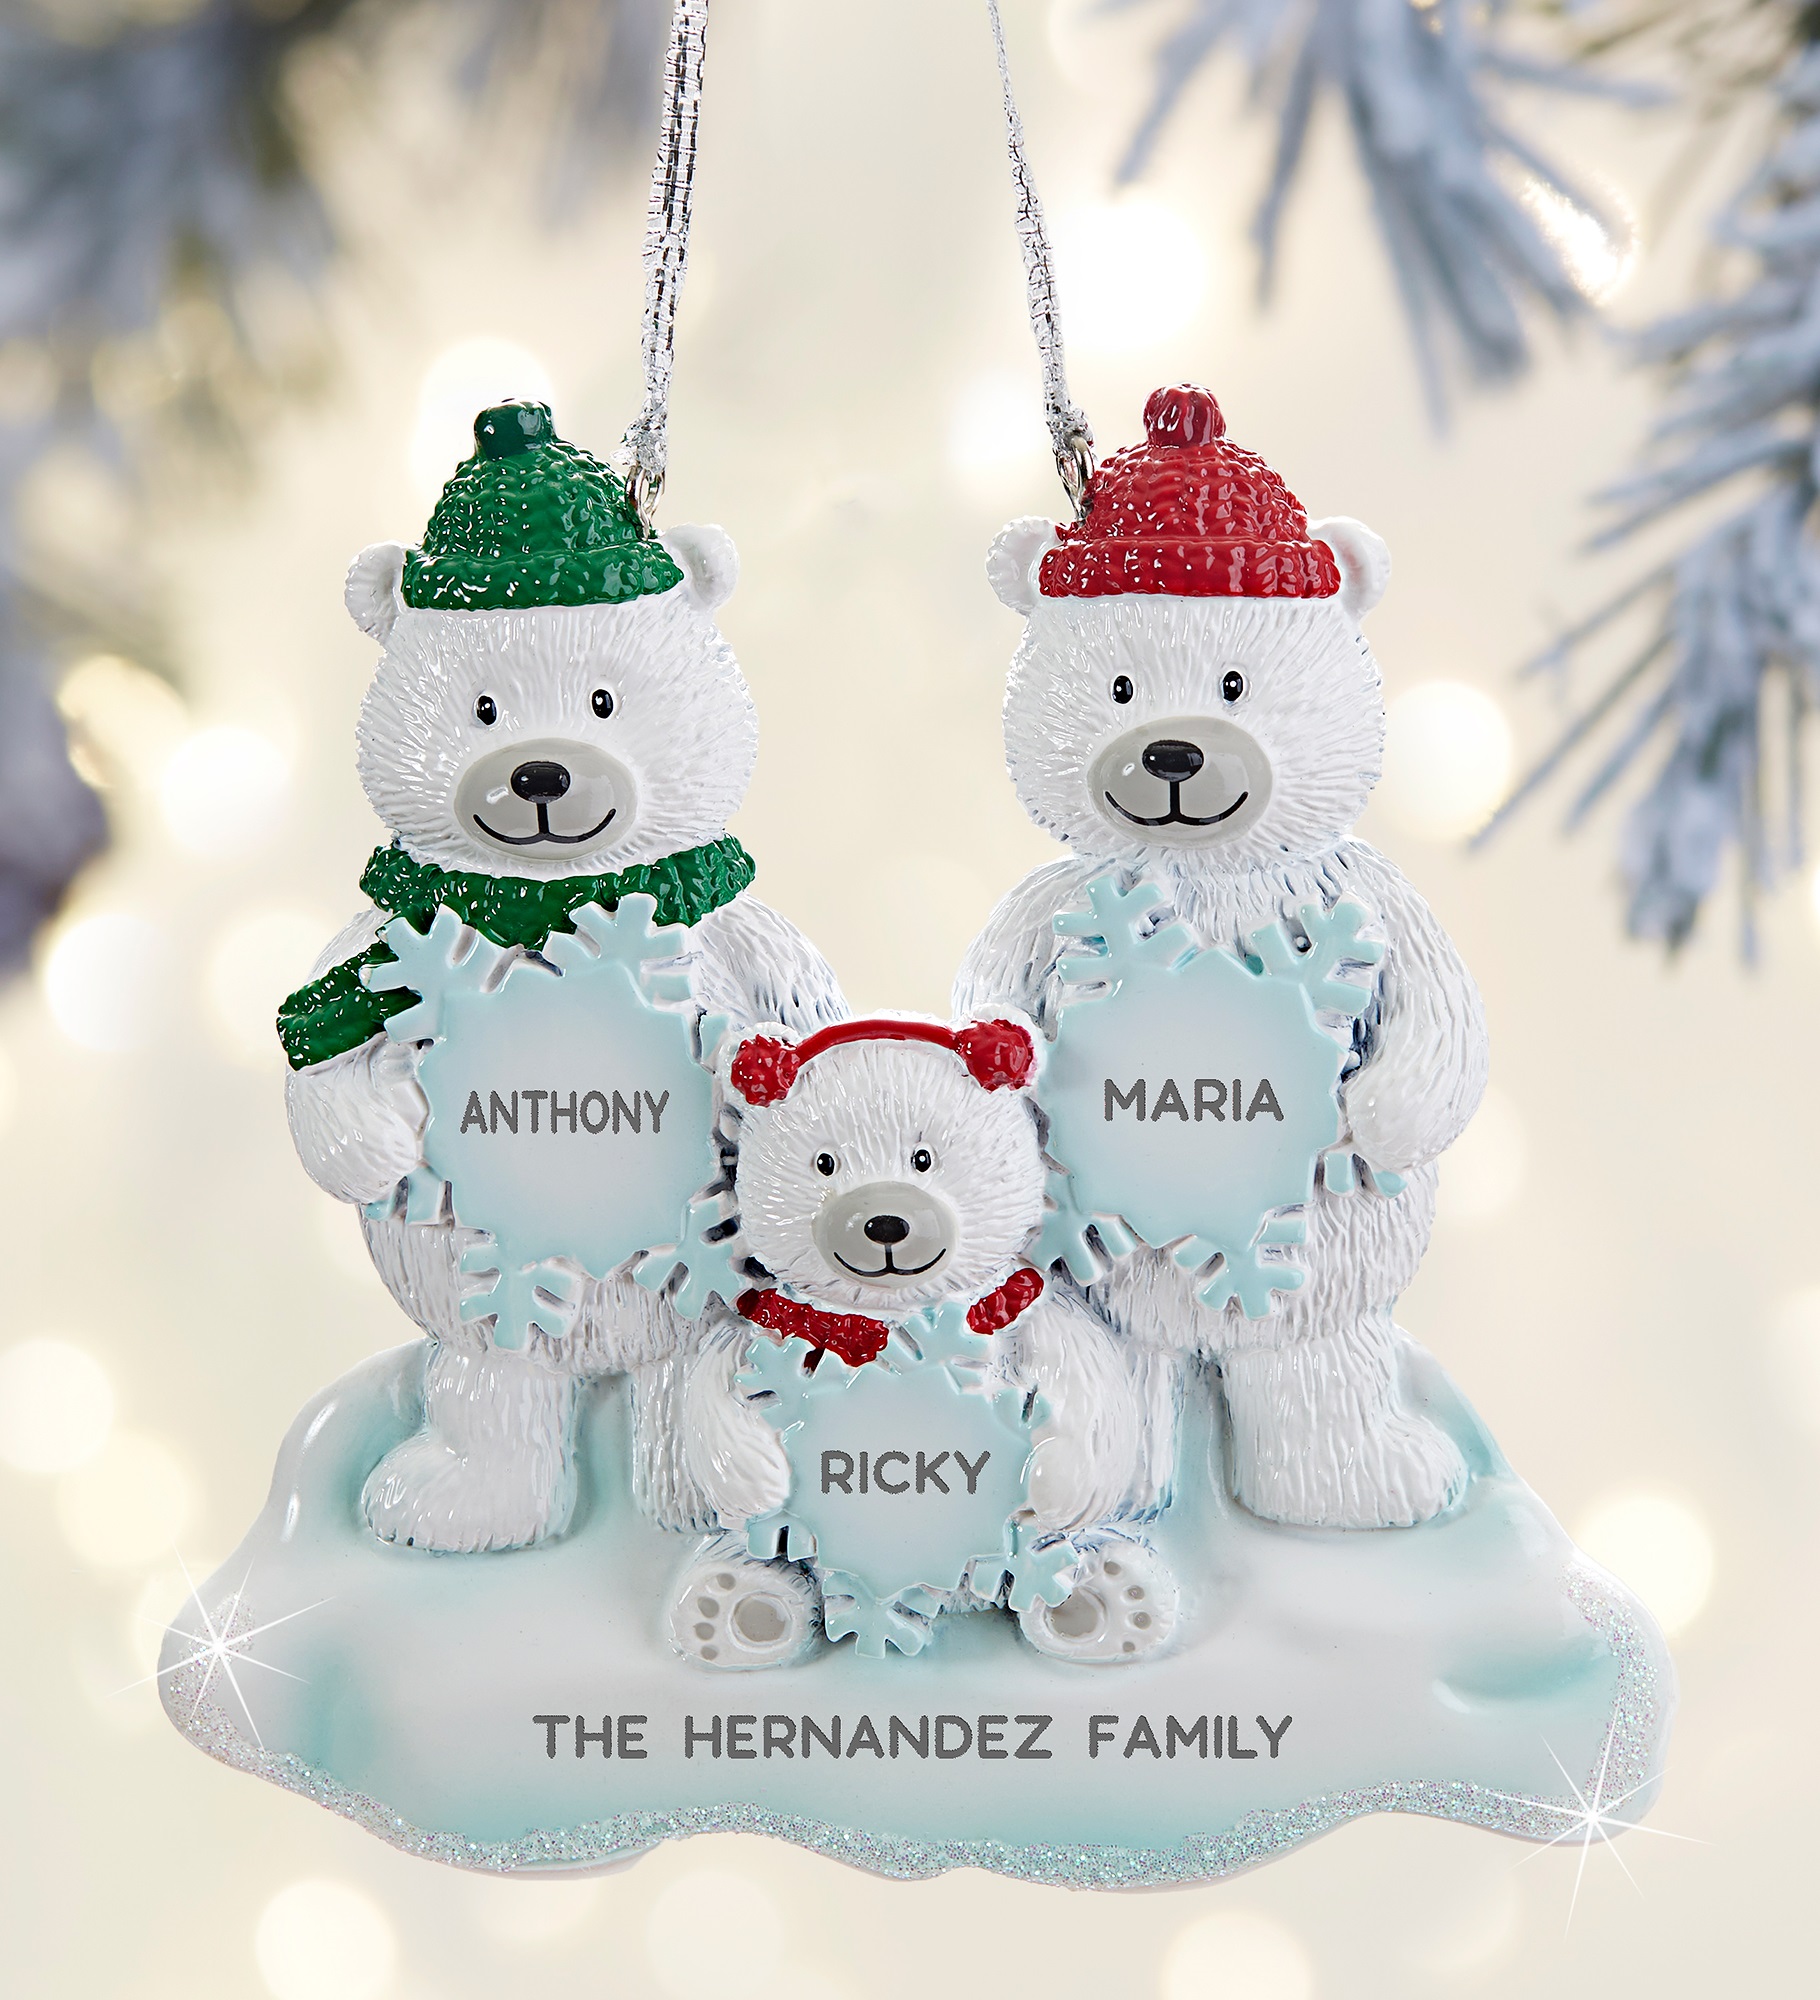 Personalized Christmas Tree Ornaments | 1800Flowers